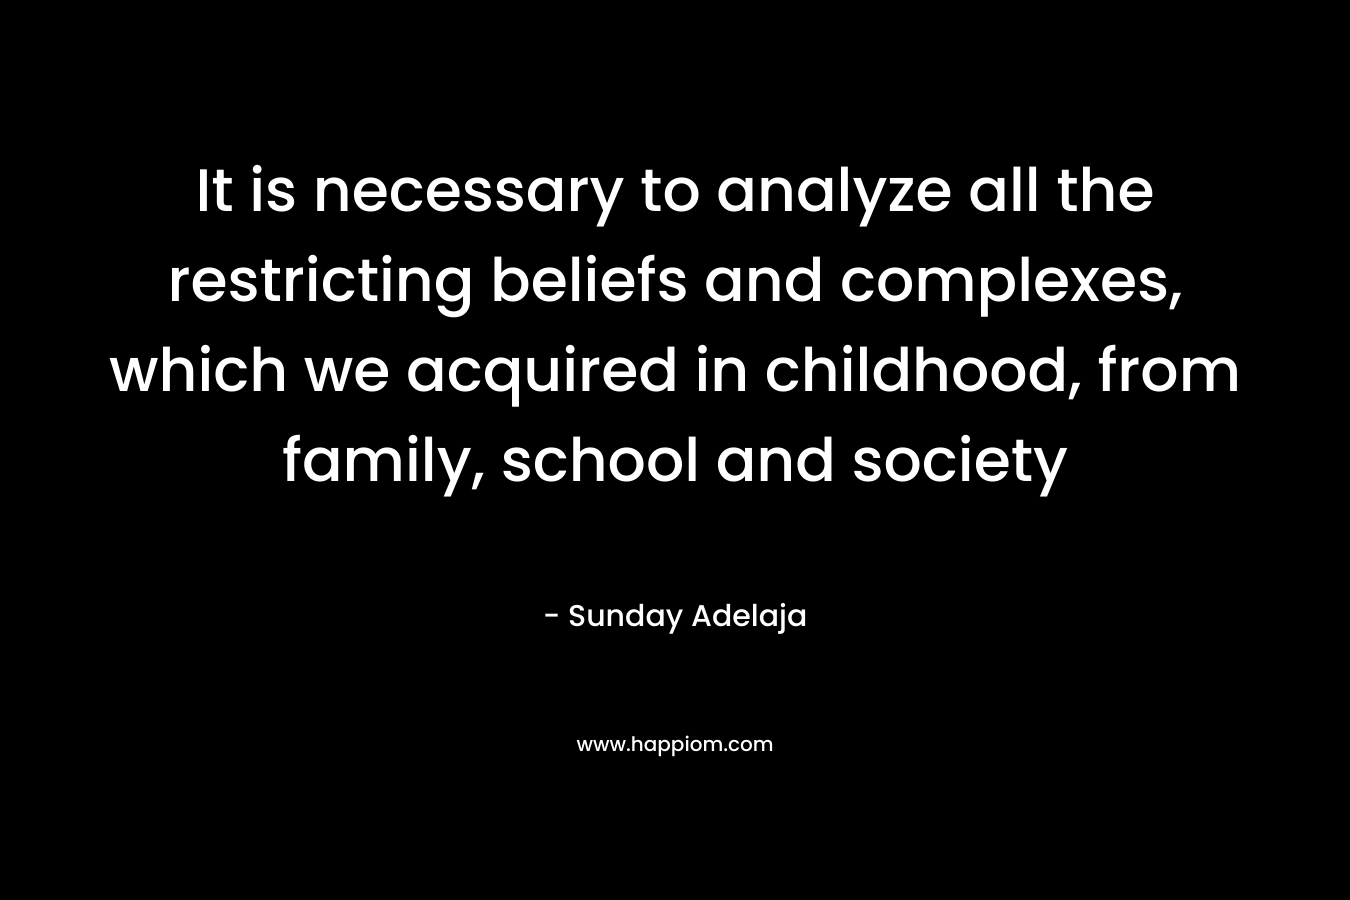 It is necessary to analyze all the restricting beliefs and complexes, which we acquired in childhood, from family, school and society